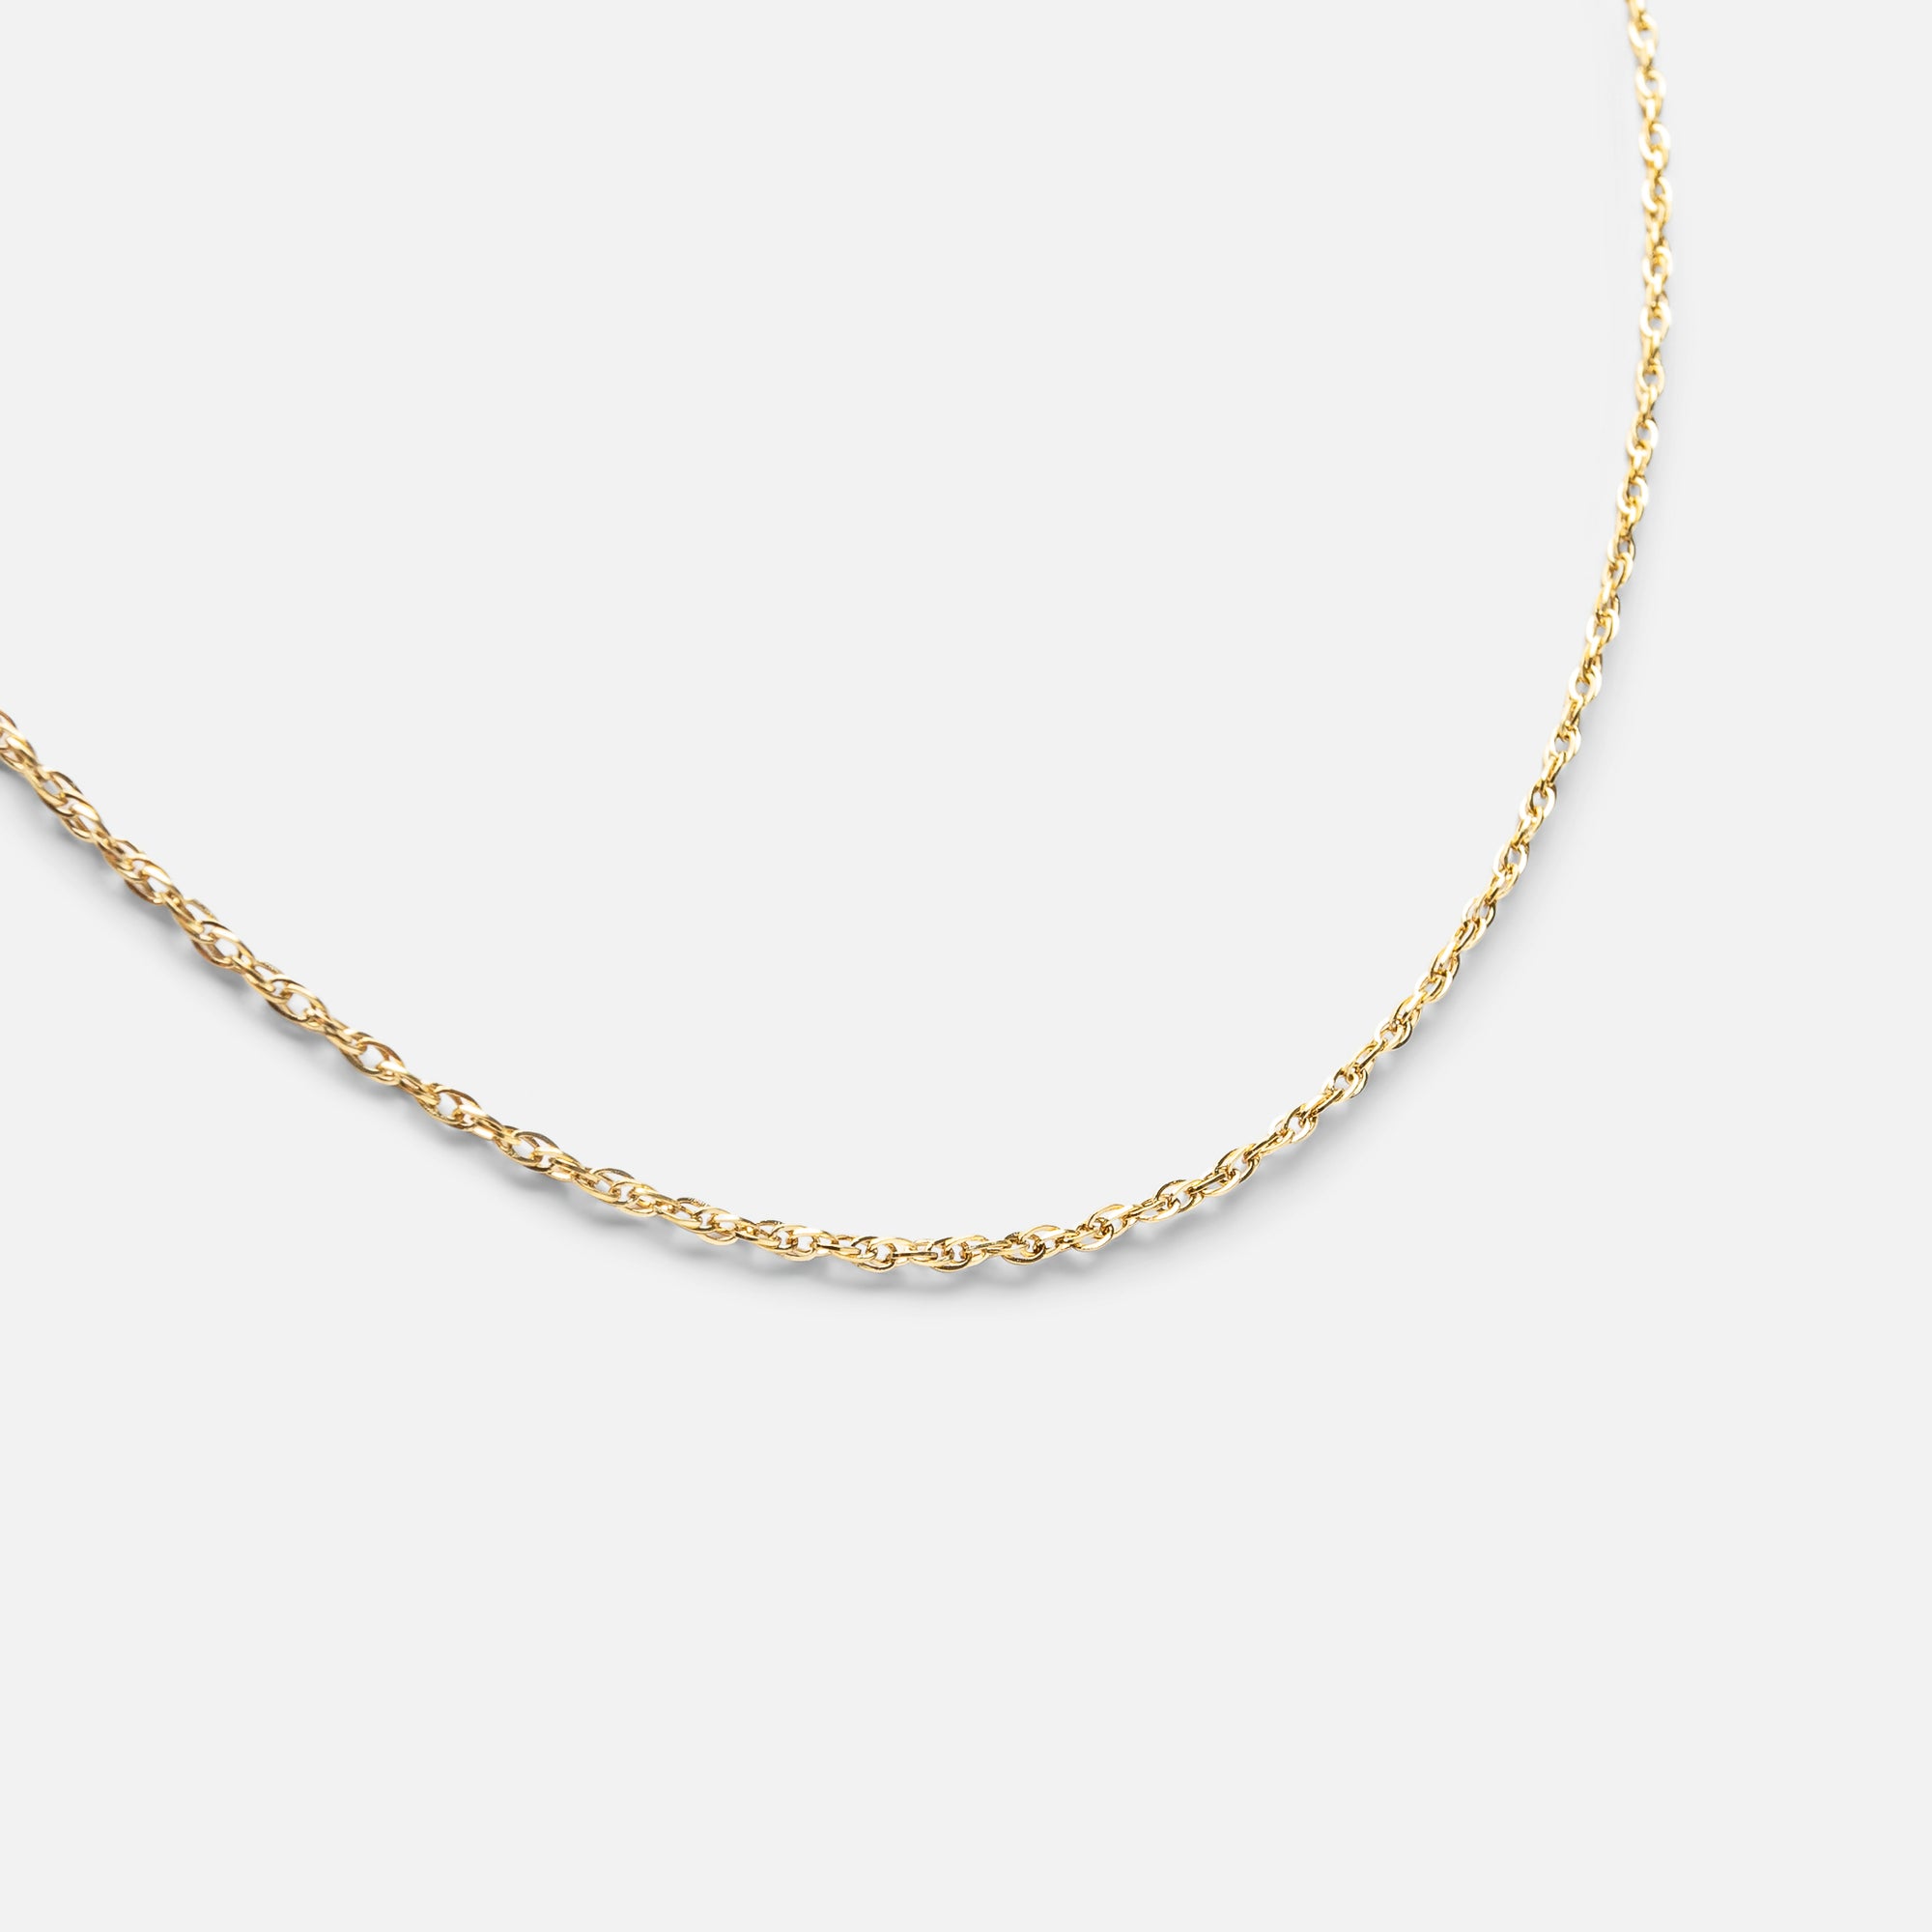 Golden chain in stainless steel